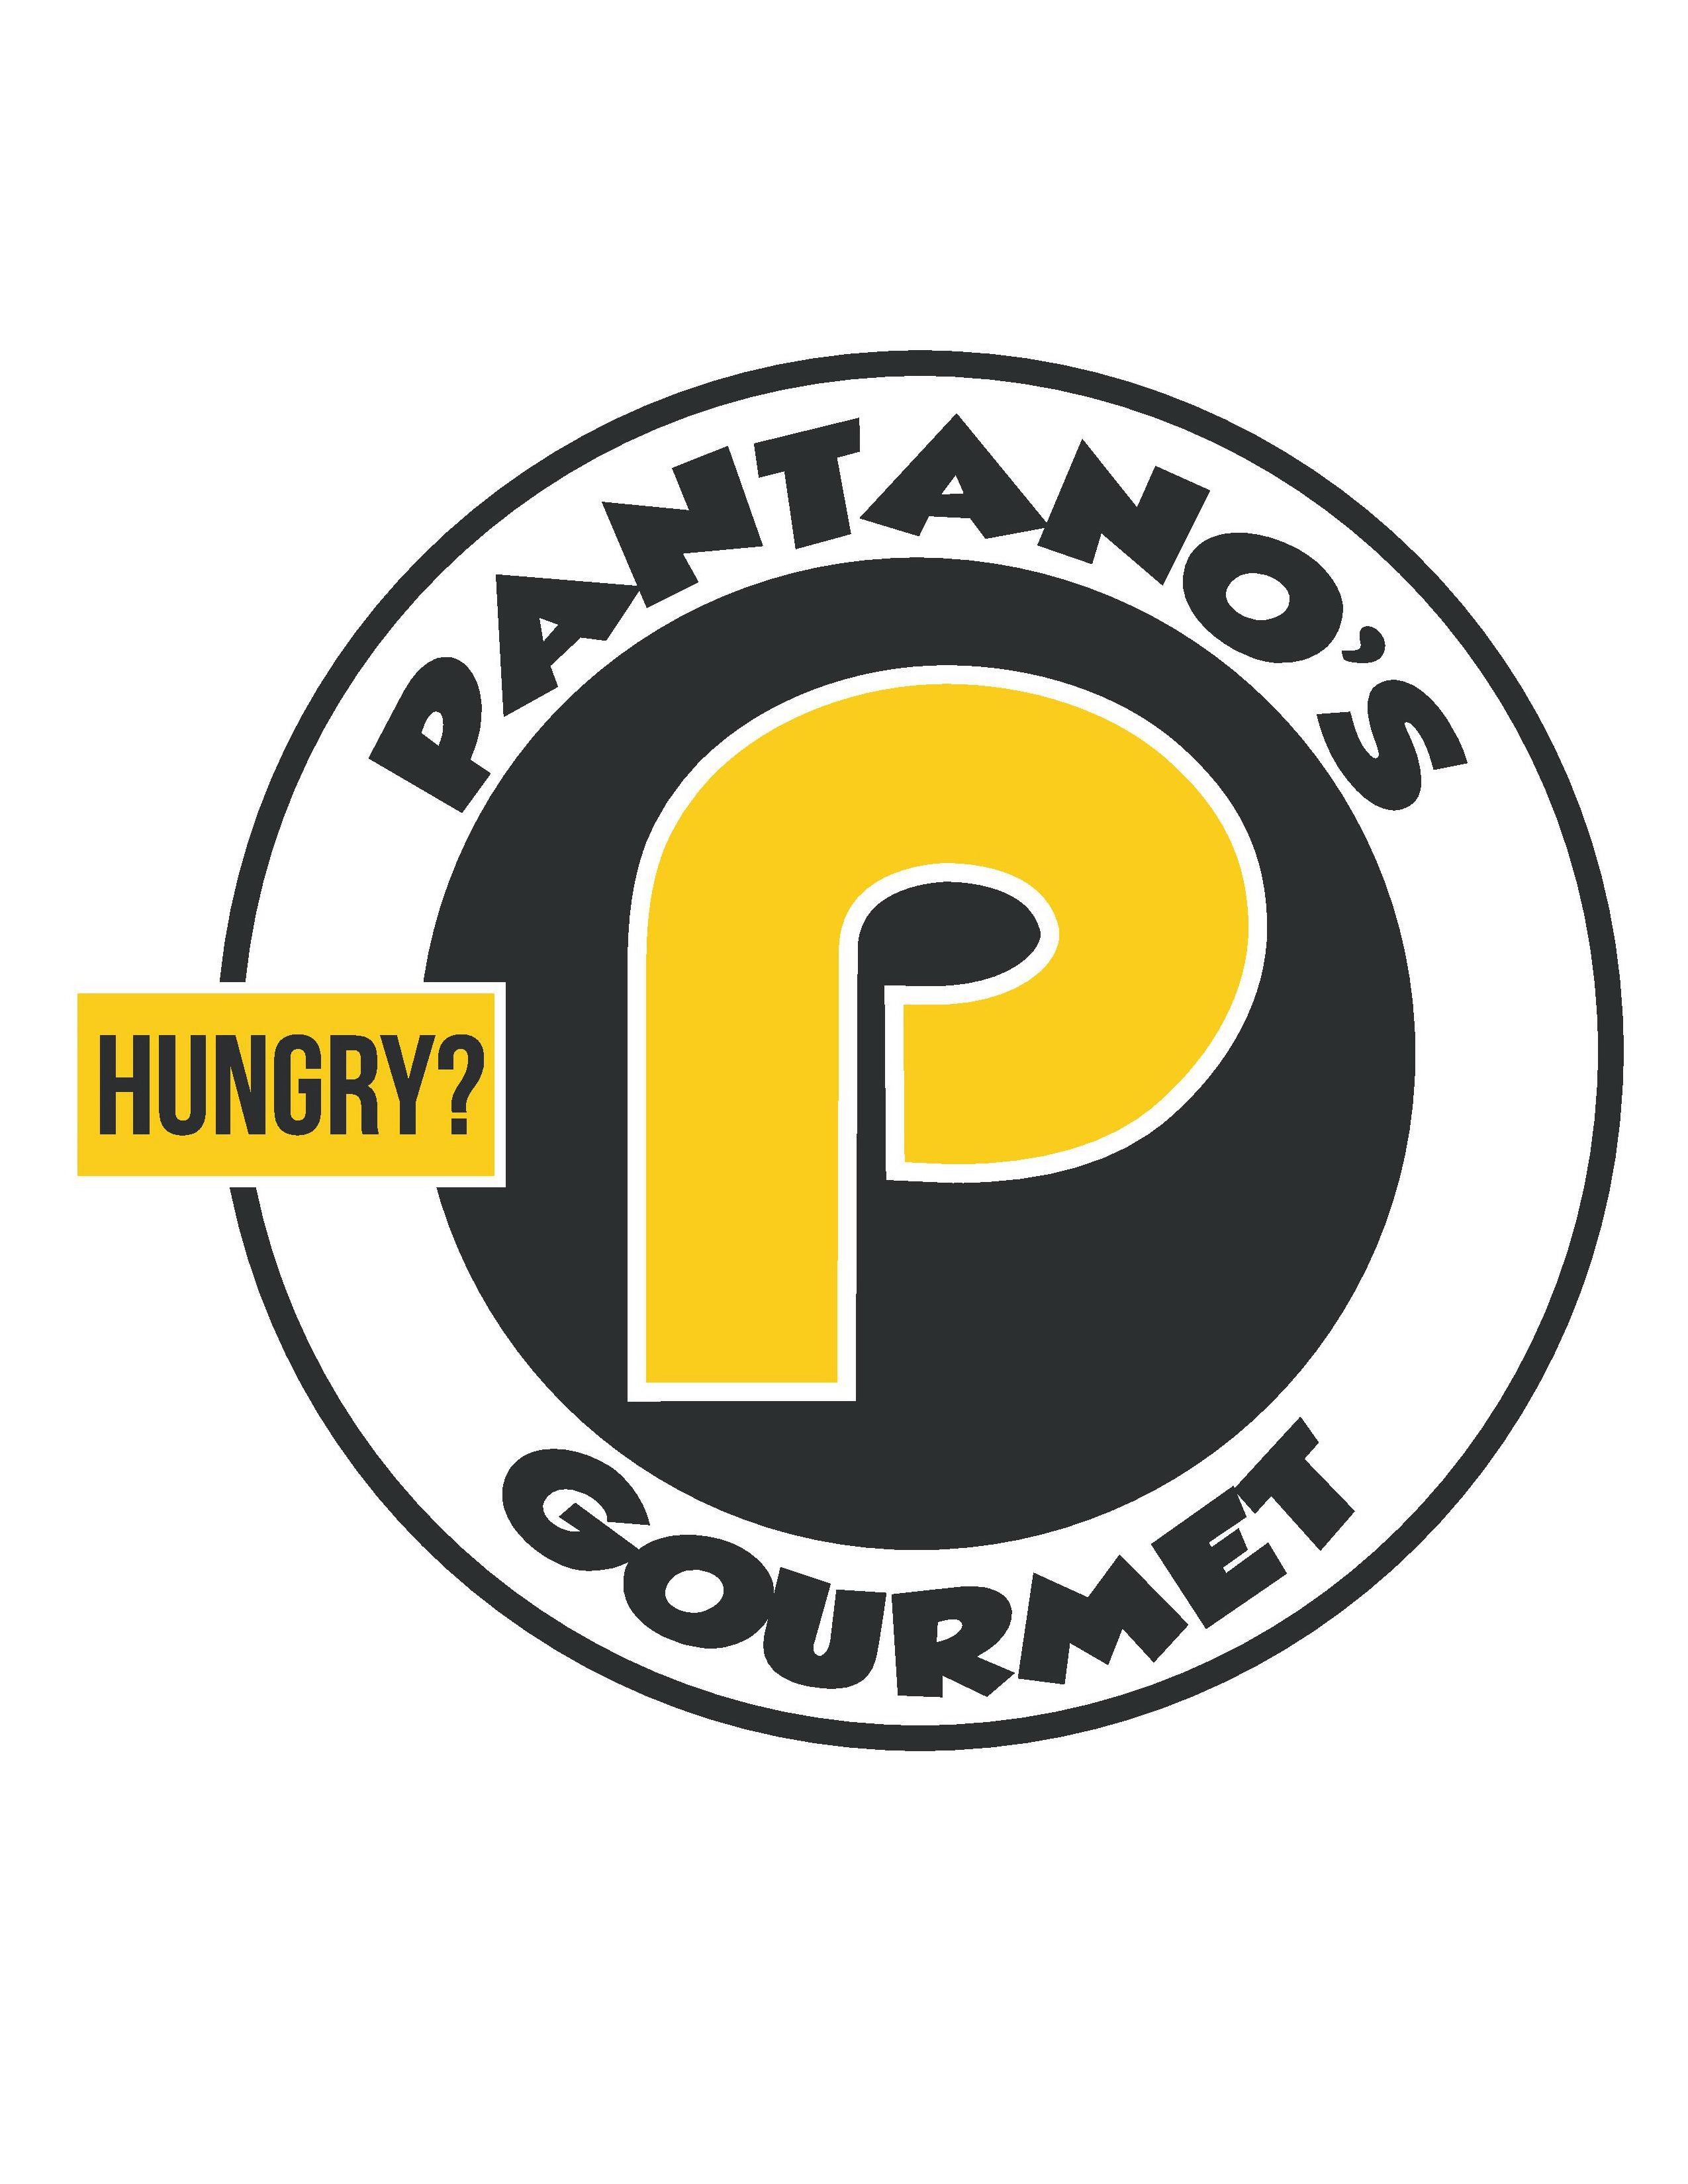  THE WORDS "PANTANO'S", "GOURMET", "HUNGRY?", AND "P"